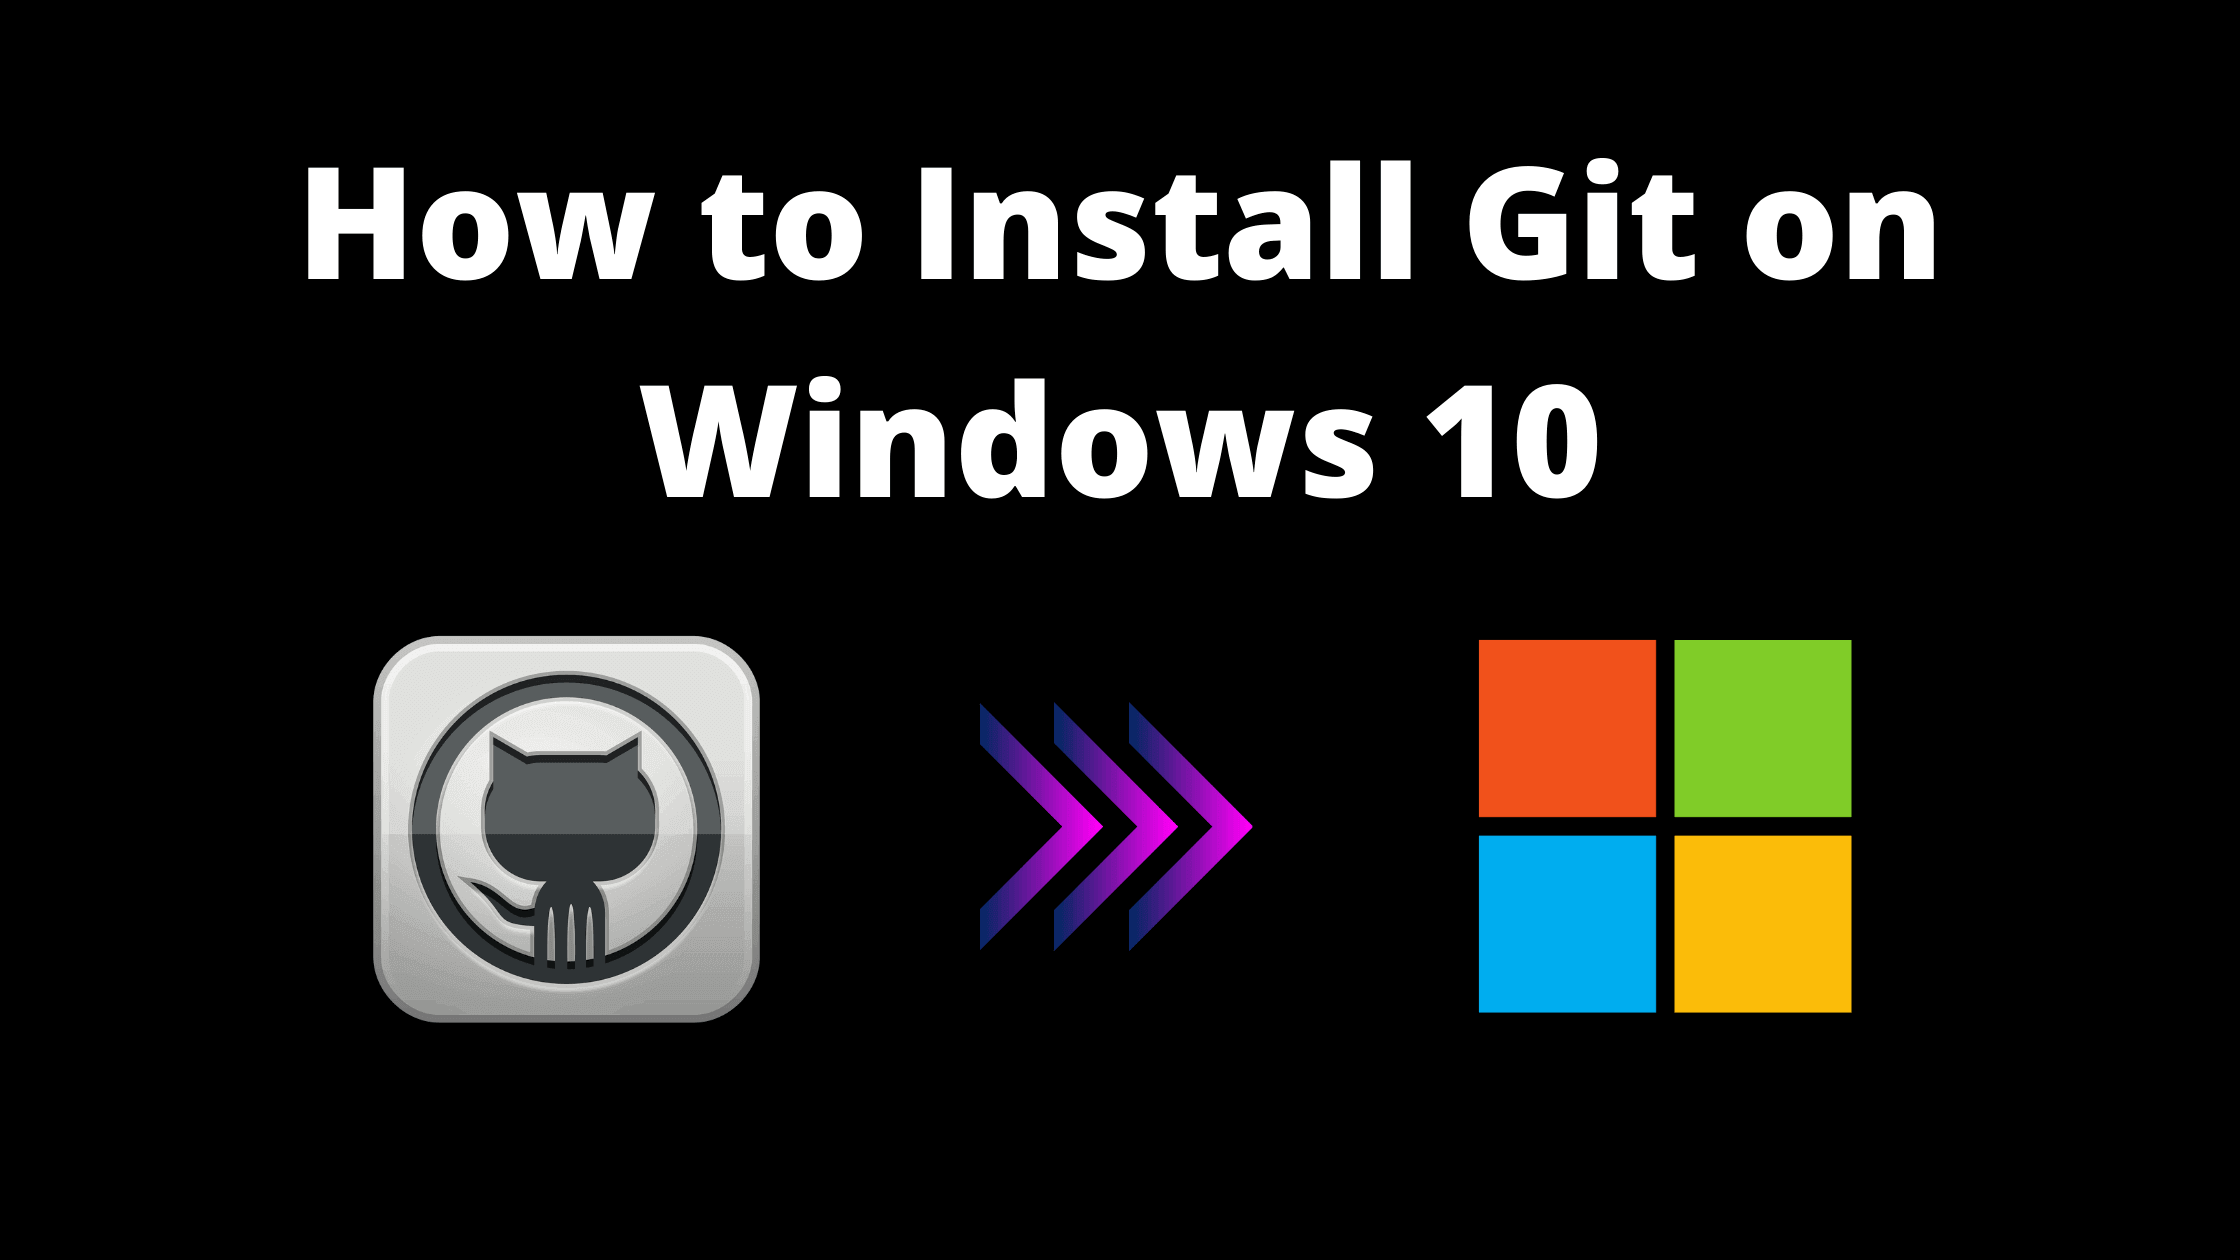 How to Install Git on Windows 10